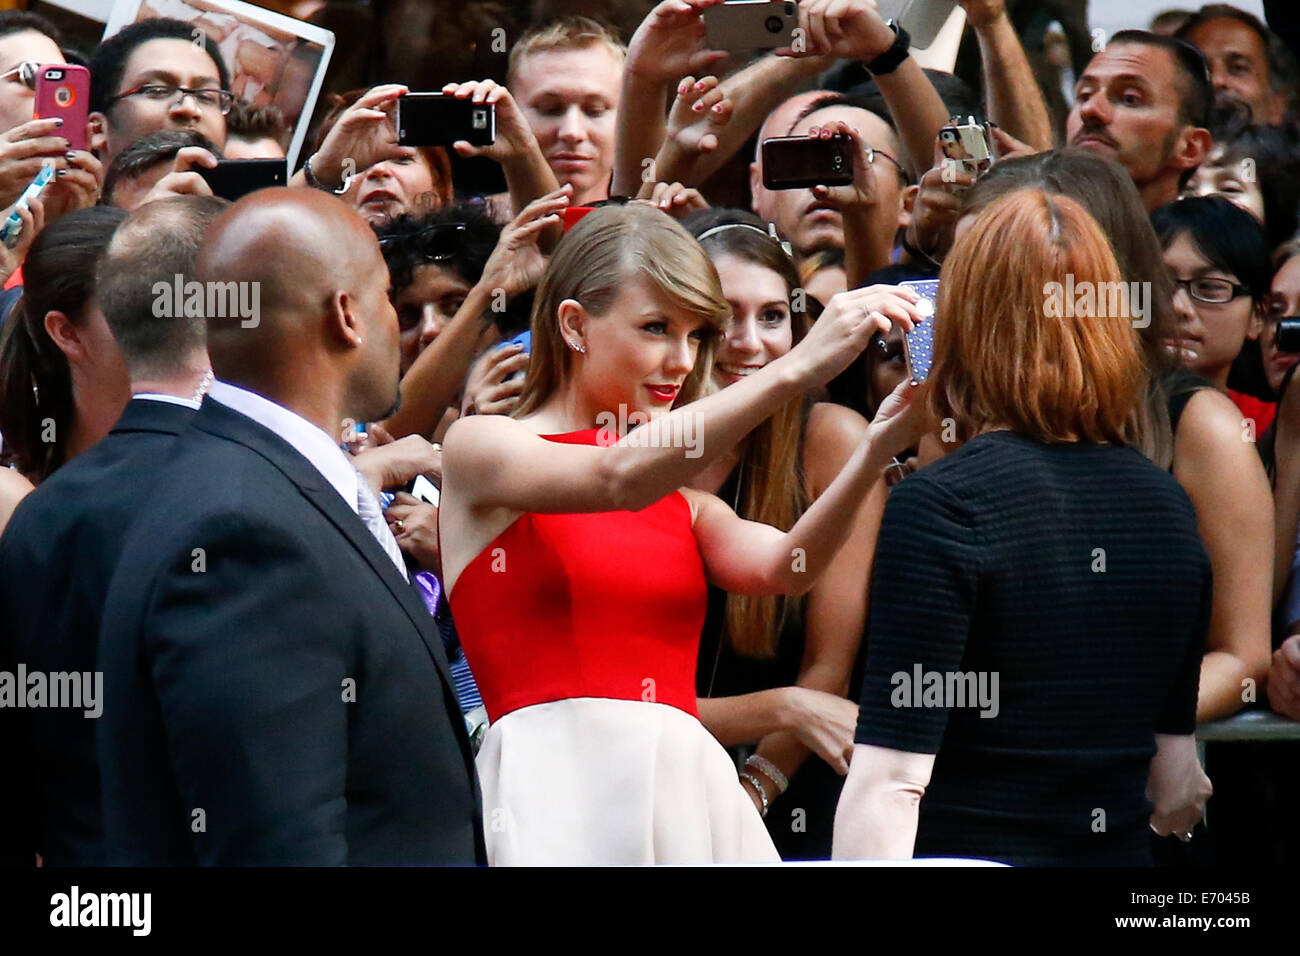 Singer Taylor Swift takes a selfie with a fan at the premiere of 'The Giver' at the Ziegfeld Theatre on August 11, 2014. Stock Photo